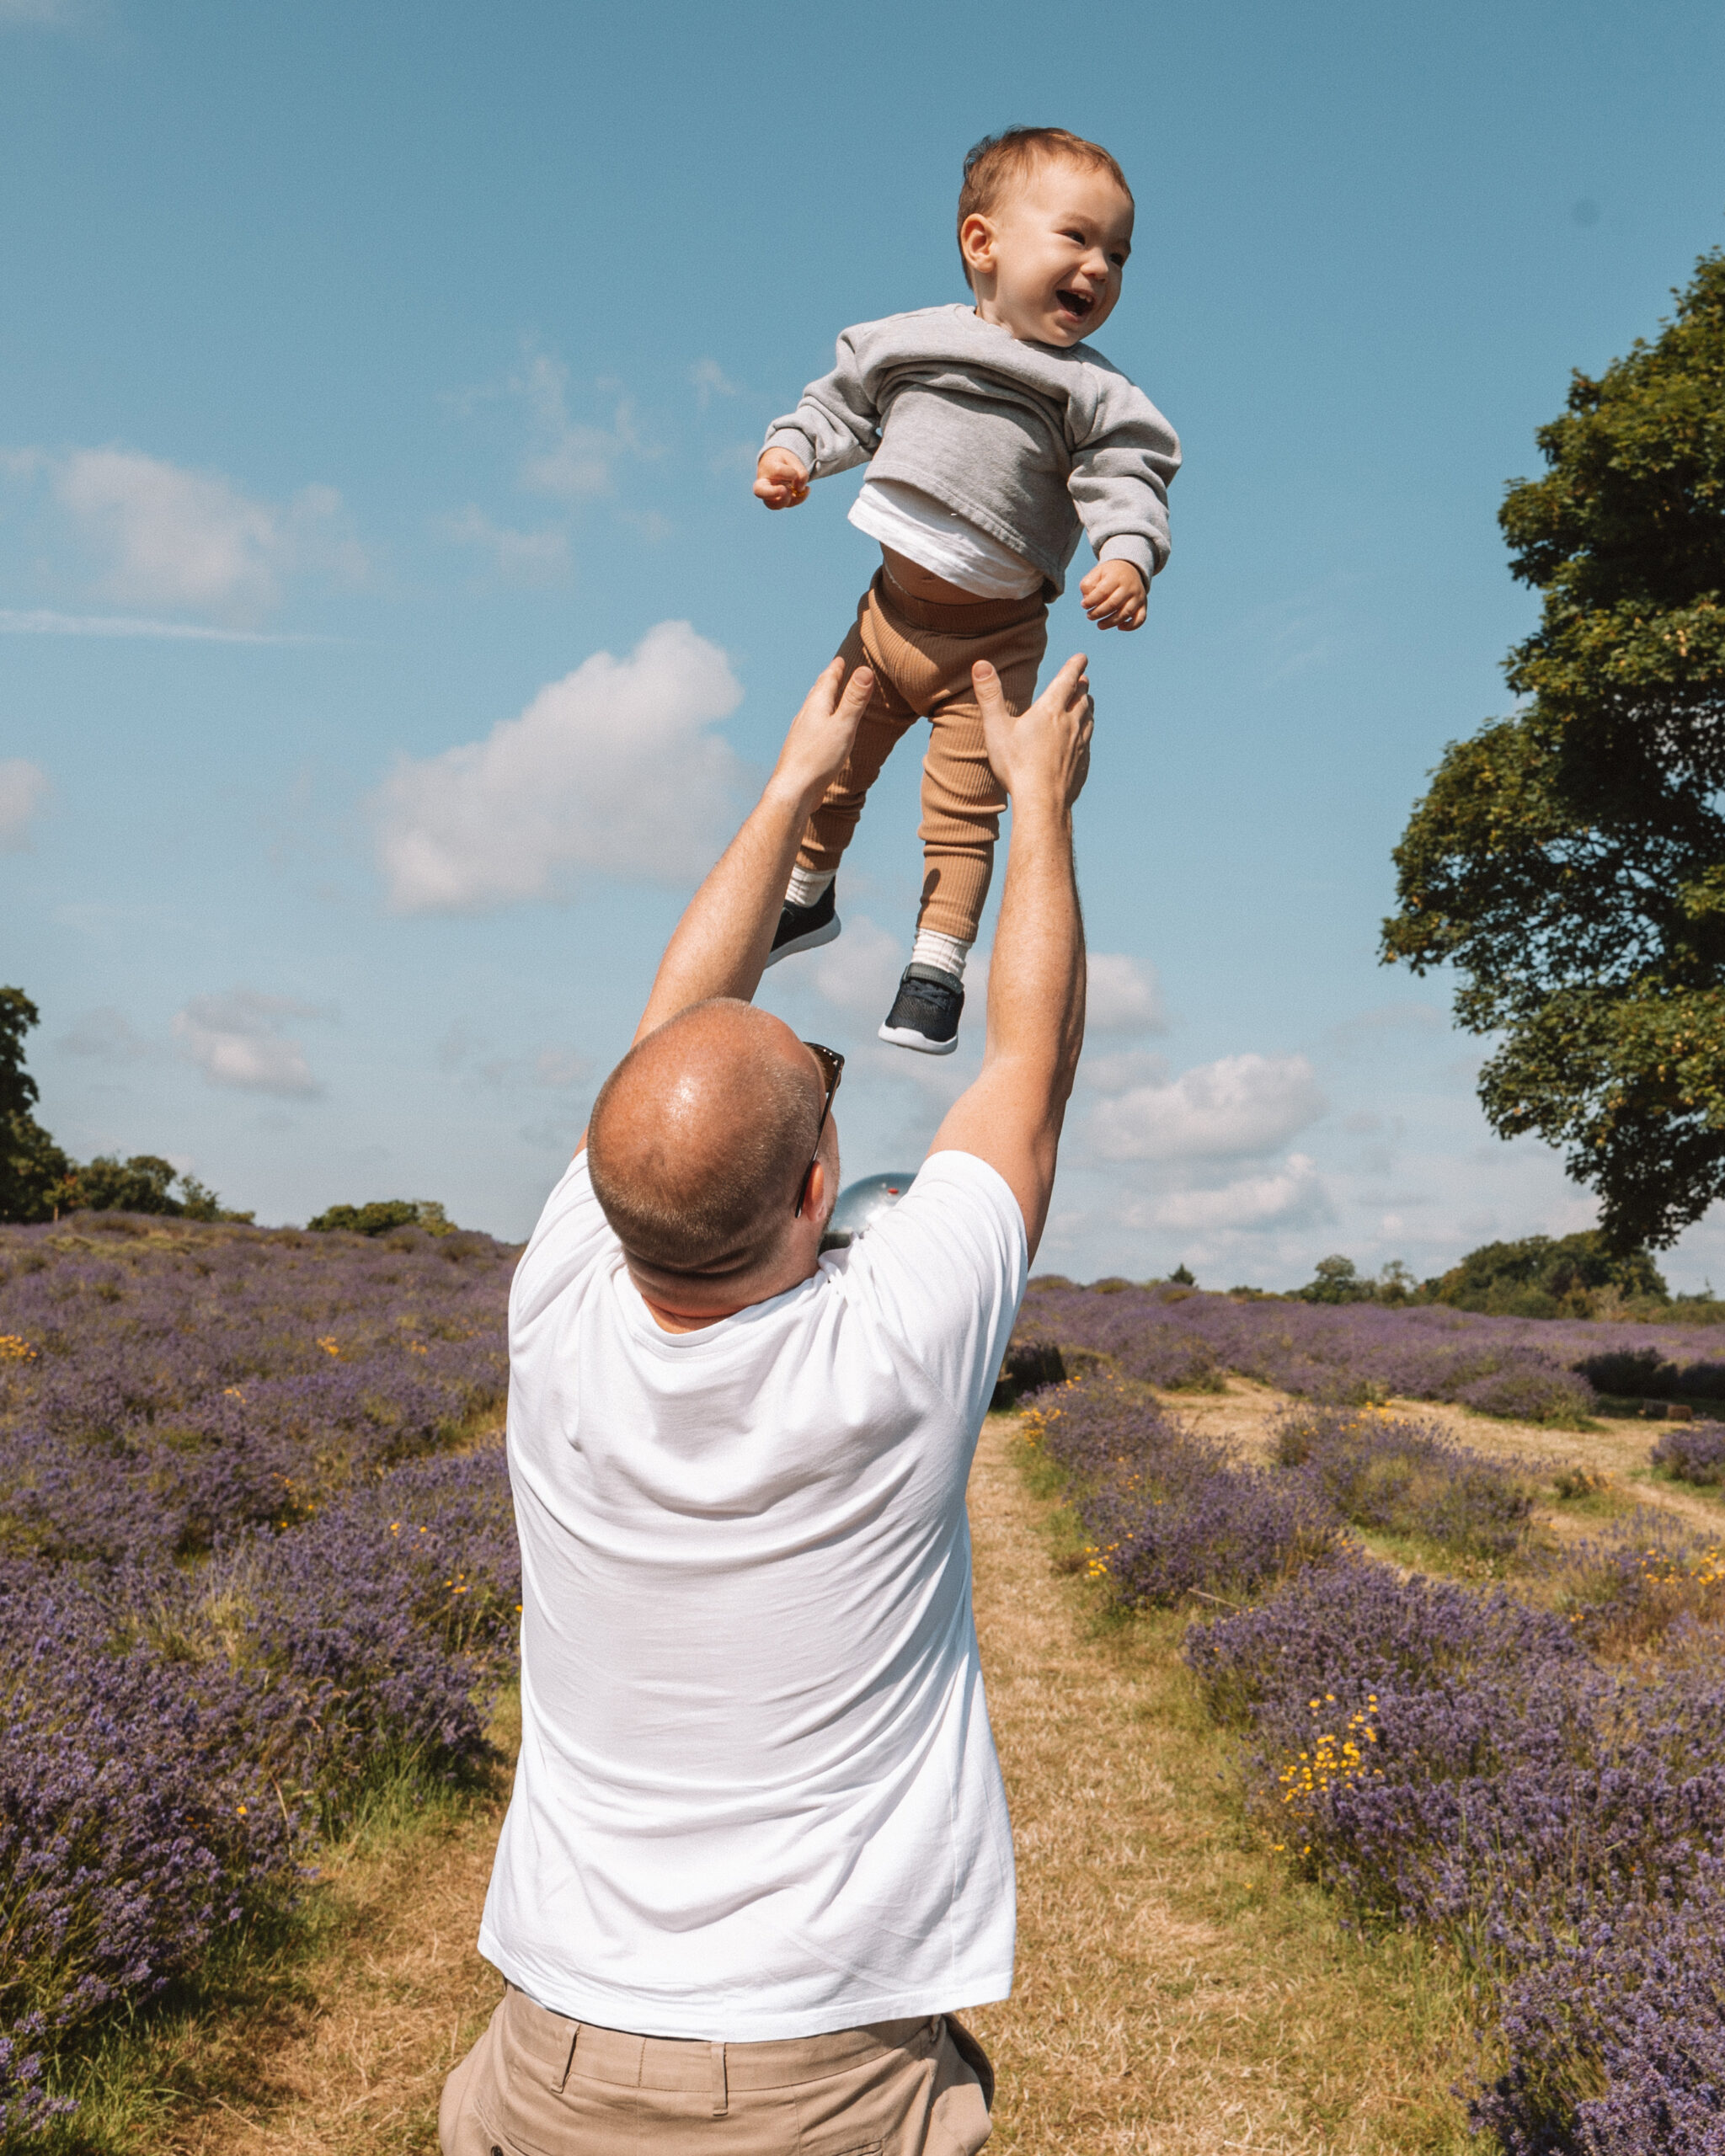 dad throwing toddler son up in the air